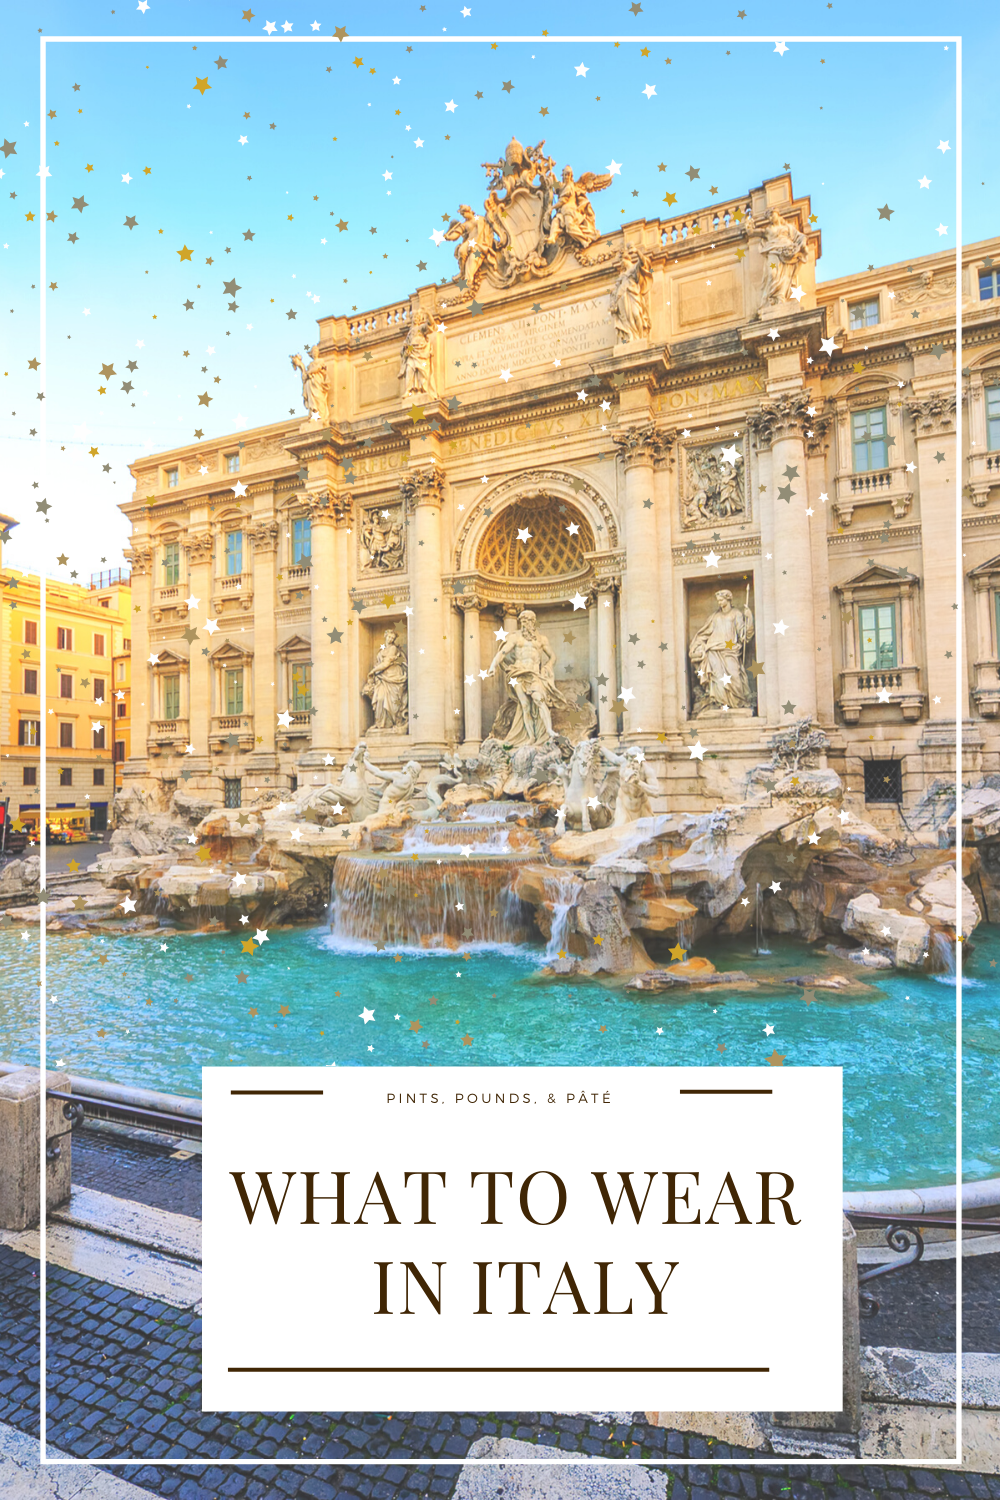 What to Wear in Italy